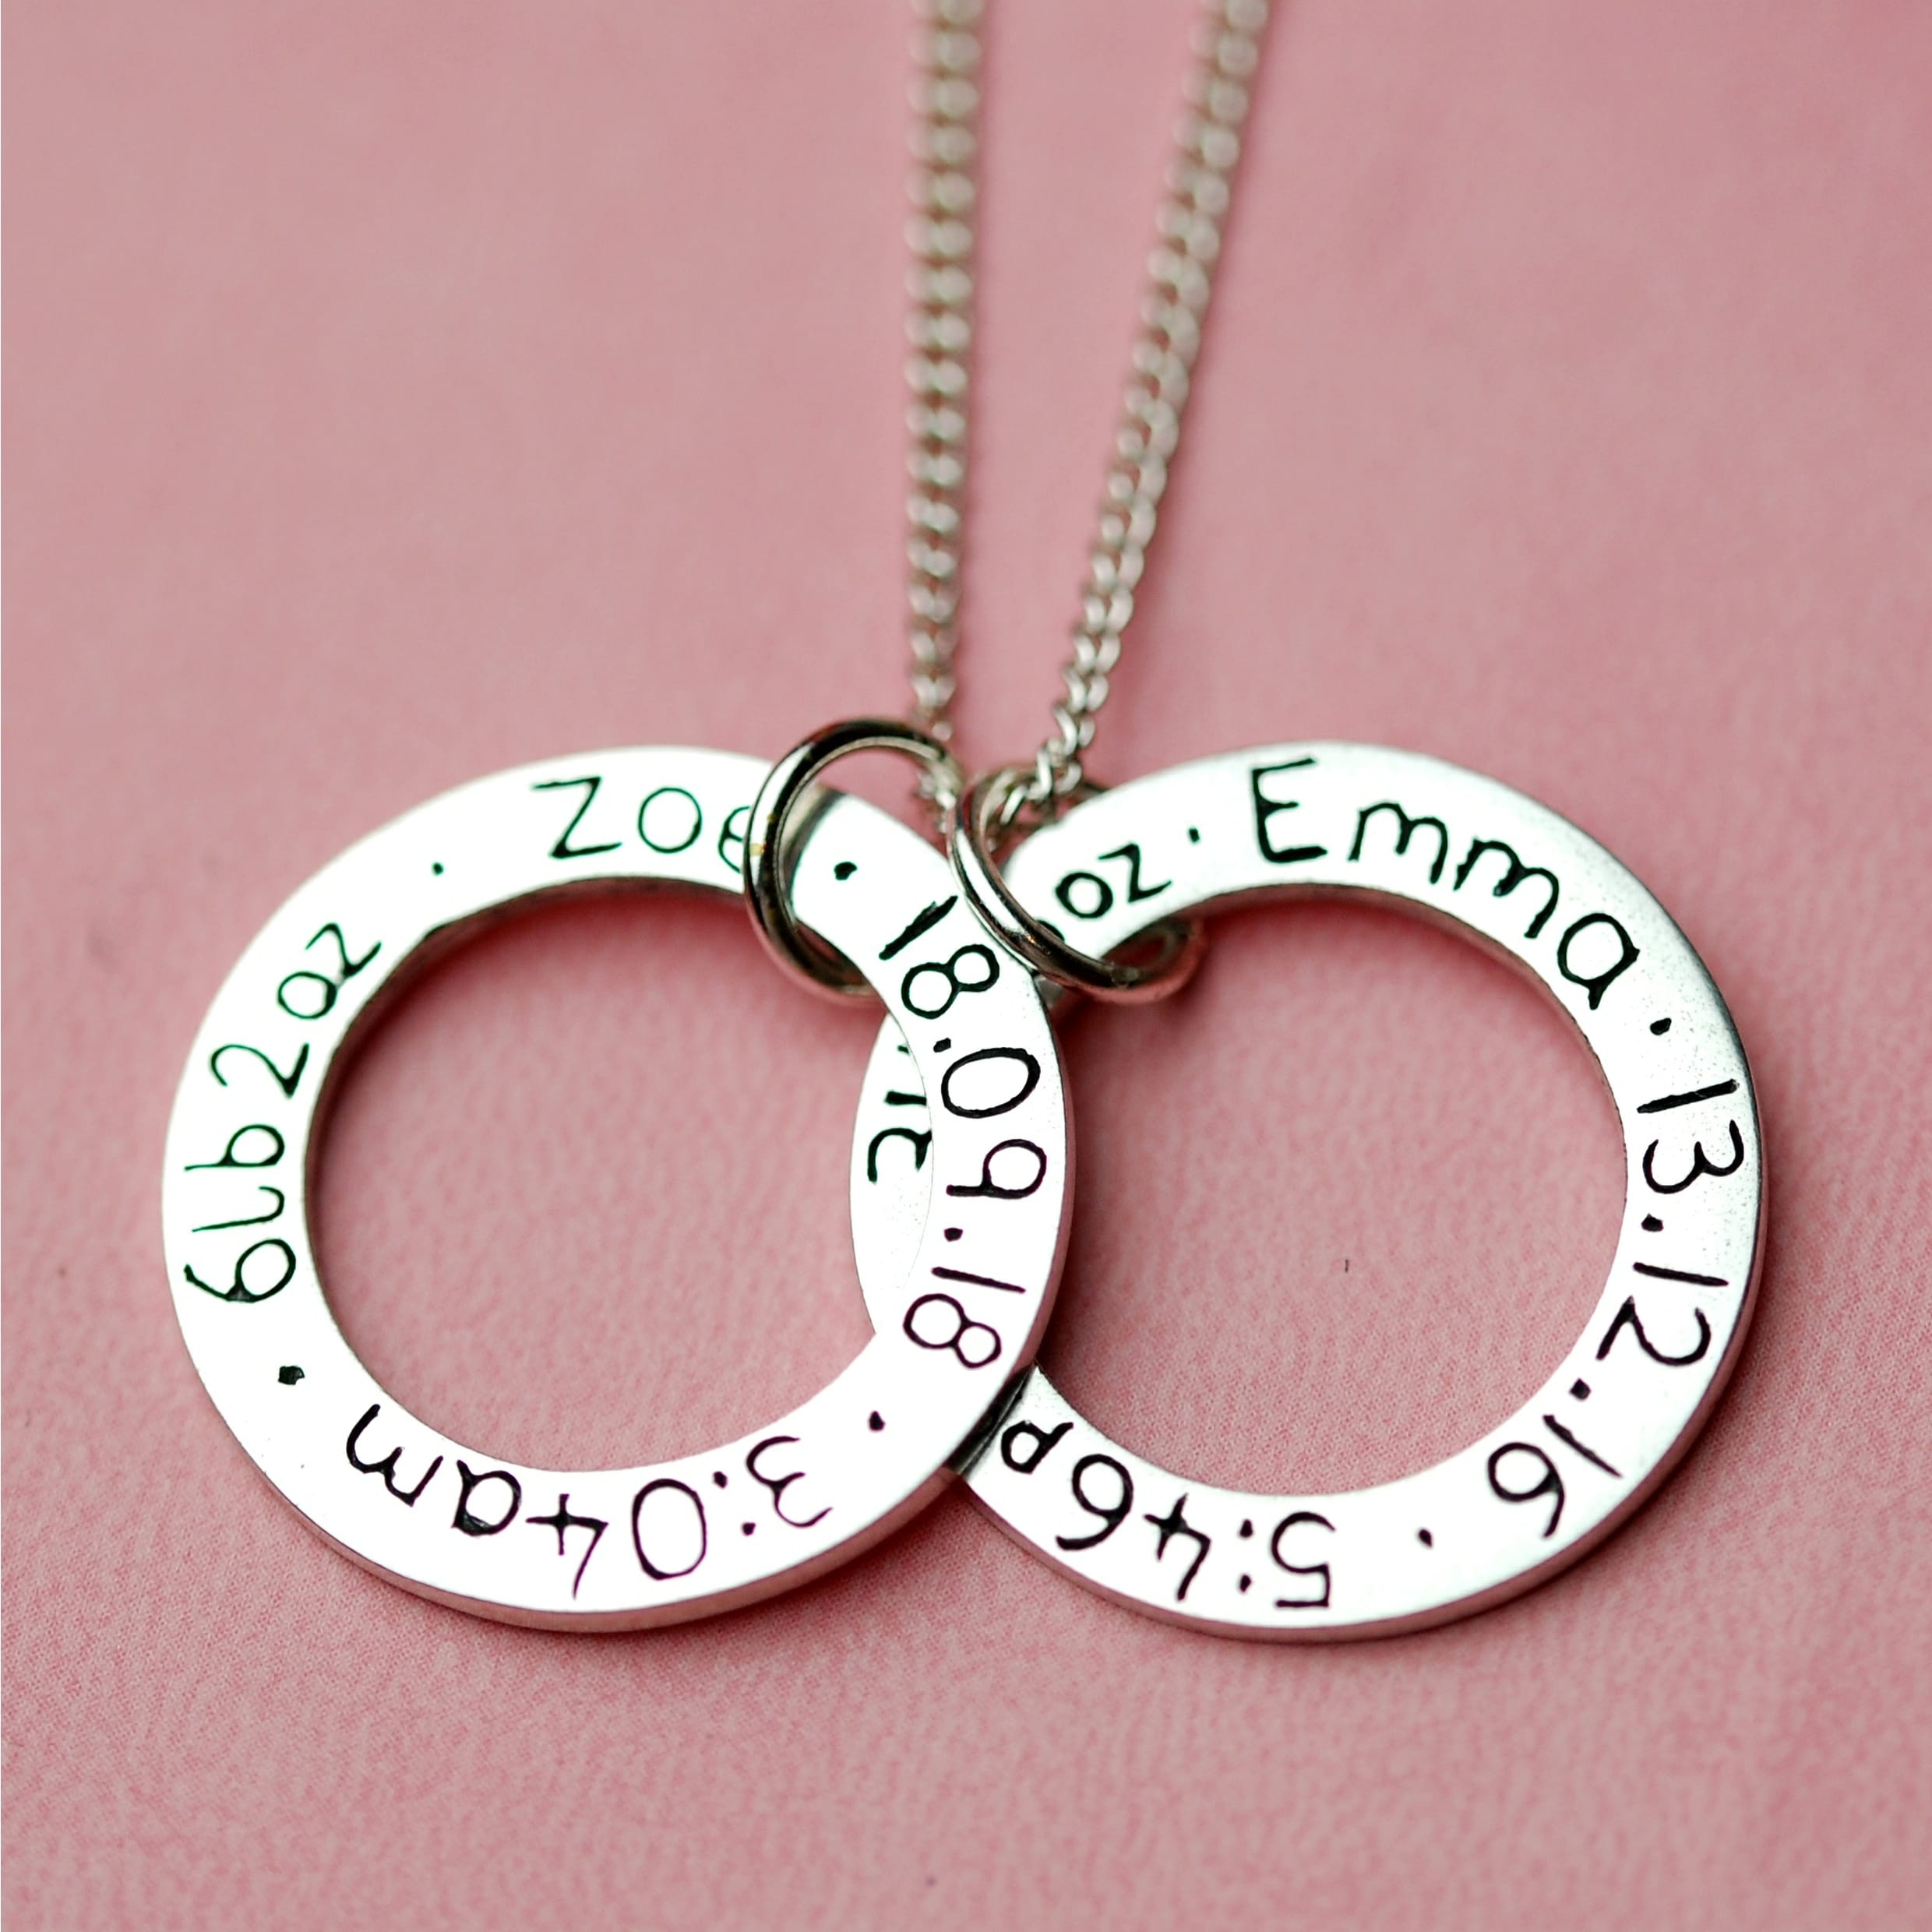 Sterling silver circle charms with baby birth details